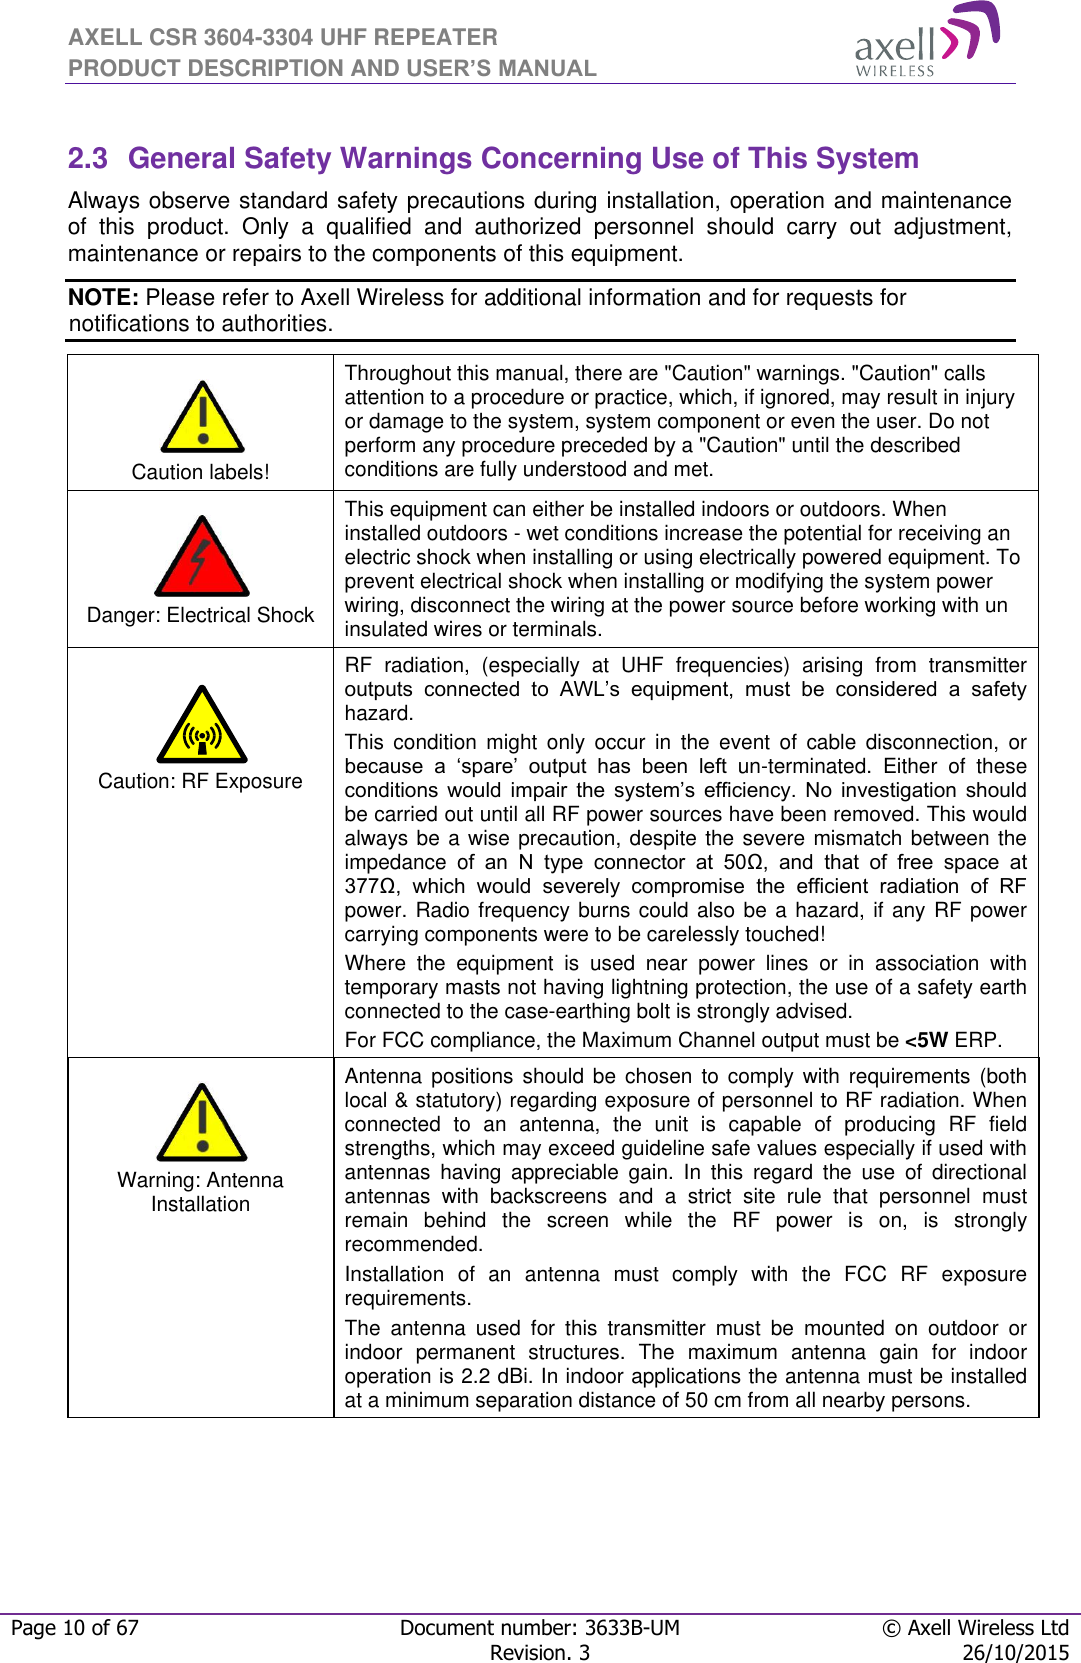 AXELL CSR 3604-3304 UHF REPEATER PRODUCT DESCRIPTION AND USER’S MANUAL  Page 10 of 67 Document number: 3633B-UM © Axell Wireless Ltd  Revision. 3 26/10/2015   2.3  General Safety Warnings Concerning Use of This System Always observe standard safety precautions during installation, operation and maintenance of  this  product.  Only  a  qualified  and  authorized  personnel  should  carry  out  adjustment, maintenance or repairs to the components of this equipment. NOTE: Please refer to Axell Wireless for additional information and for requests for notifications to authorities.      Caution labels! Throughout this manual, there are &quot;Caution&quot; warnings. &quot;Caution&quot; calls attention to a procedure or practice, which, if ignored, may result in injury or damage to the system, system component or even the user. Do not perform any procedure preceded by a &quot;Caution&quot; until the described conditions are fully understood and met.    Danger: Electrical Shock This equipment can either be installed indoors or outdoors. When installed outdoors - wet conditions increase the potential for receiving an electric shock when installing or using electrically powered equipment. To prevent electrical shock when installing or modifying the system power wiring, disconnect the wiring at the power source before working with un insulated wires or terminals.   Caution: RF Exposure RF  radiation,  (especially  at  UHF  frequencies)  arising  from  transmitter outputs  connected  to  AWL’s  equipment,  must  be  considered  a  safety hazard. This  condition  might  only  occur  in  the  event  of  cable  disconnection,  or because  a  ‘spare’  output  has  been  left  un-terminated.  Either  of  these conditions  would  impair  the  system’s  efficiency.  No  investigation  should be carried out until all RF power sources have been removed. This would always be a wise precaution, despite the severe mismatch between the impedance  of  an  N  type  connector  at  50Ω,  and  that  of  free  space  at 377Ω,  which  would  severely  compromise  the  efficient  radiation  of  RF power. Radio frequency burns could also be a hazard, if any RF power carrying components were to be carelessly touched! Where  the  equipment  is  used  near  power  lines  or  in  association  with temporary masts not having lightning protection, the use of a safety earth connected to the case-earthing bolt is strongly advised. For FCC compliance, the Maximum Channel output must be &lt;5W ERP.   Warning: Antenna Installation Antenna positions  should  be  chosen  to  comply  with  requirements  (both local &amp; statutory) regarding exposure of personnel to RF radiation. When connected  to  an  antenna,  the  unit  is  capable  of  producing  RF  field strengths, which may exceed guideline safe values especially if used with antennas  having  appreciable  gain.  In  this  regard  the  use  of  directional antennas  with  backscreens  and  a  strict  site  rule  that  personnel  must remain  behind  the  screen  while  the  RF  power  is  on,  is  strongly recommended. Installation  of  an  antenna  must  comply  with  the  FCC  RF  exposure requirements. The  antenna  used  for  this  transmitter  must  be  mounted  on  outdoor  or indoor  permanent  structures.  The  maximum  antenna  gain  for  indoor operation is 2.2 dBi. In indoor applications the antenna must be installed at a minimum separation distance of 50 cm from all nearby persons. 